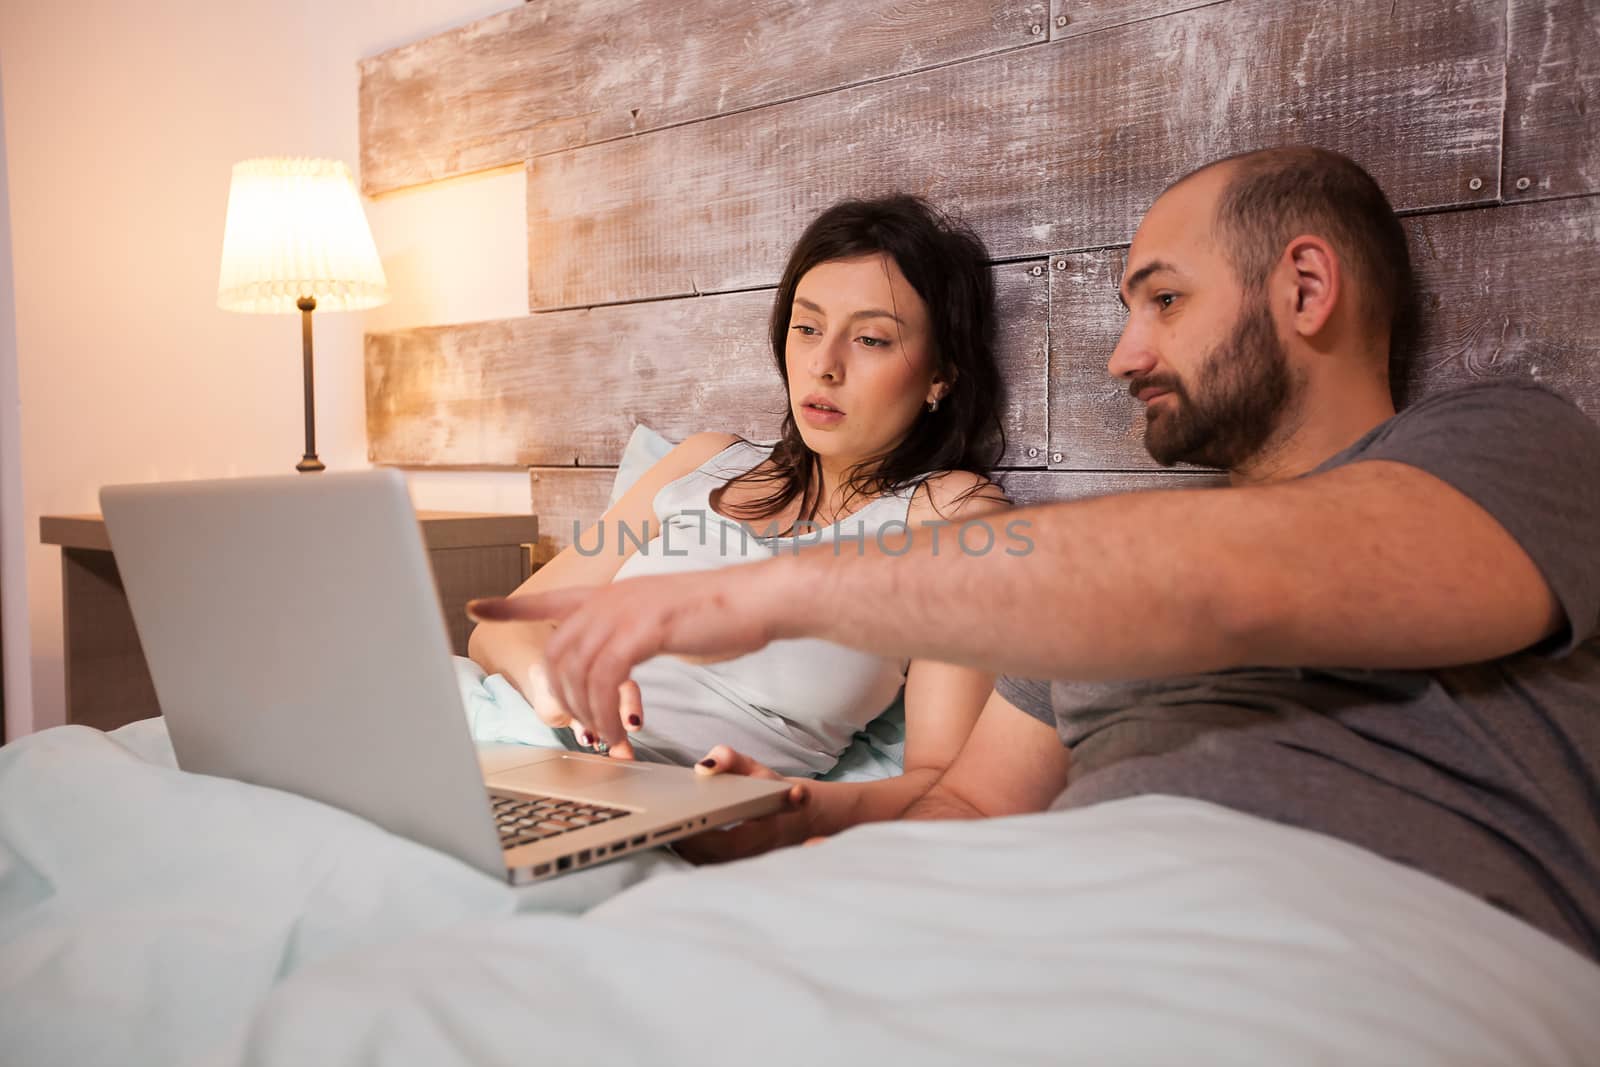 Husband pointing at laptop before bedtime by DCStudio